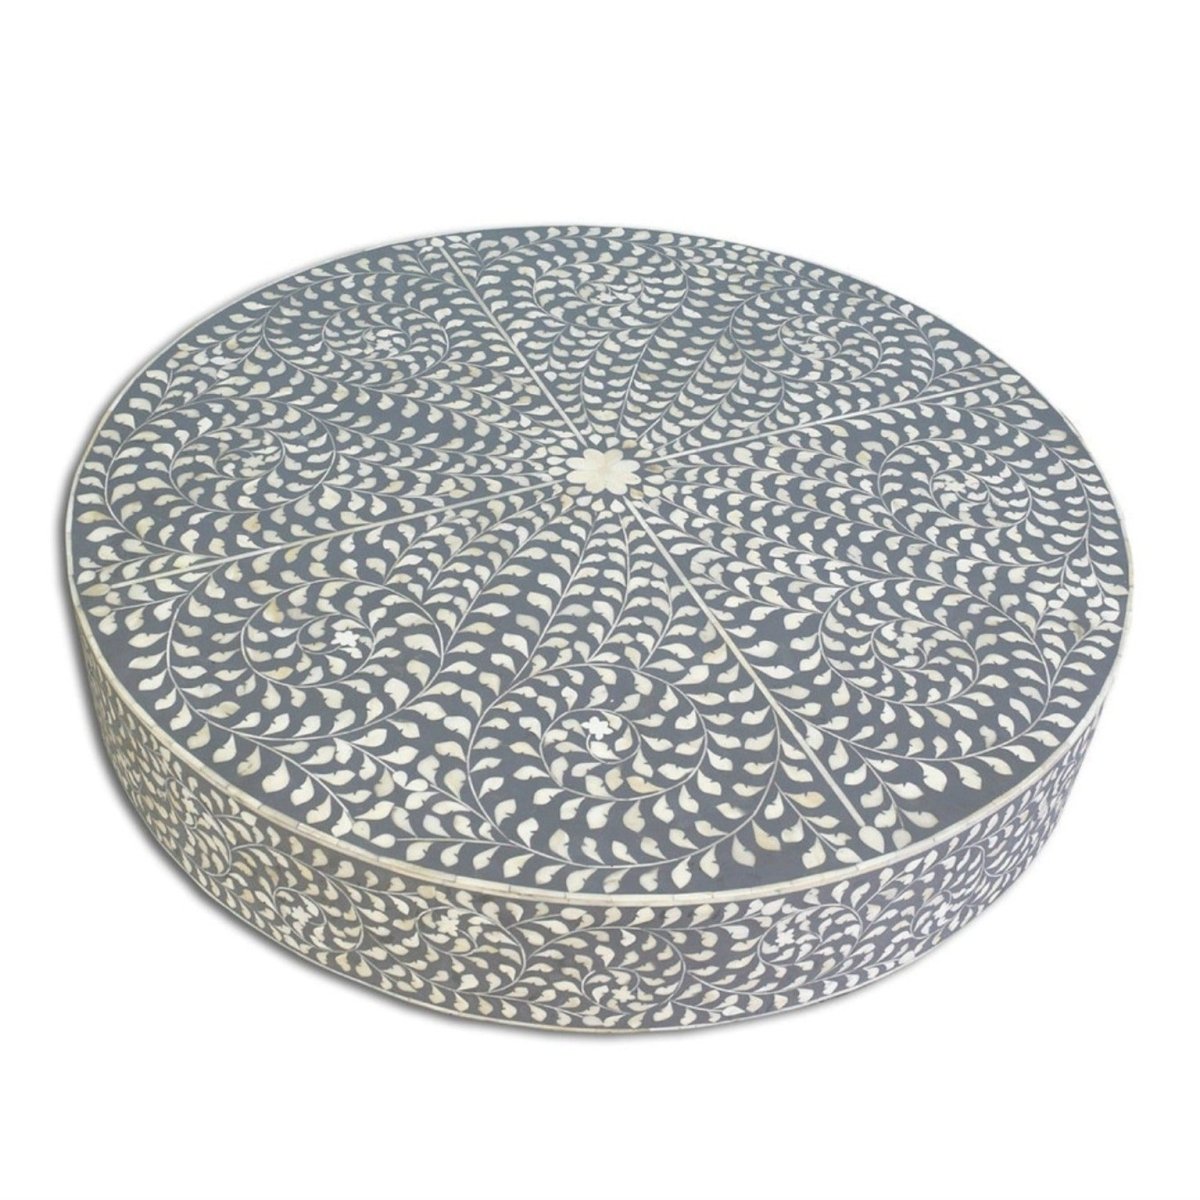  Floral Design Center Table  in Grey Color - Top View